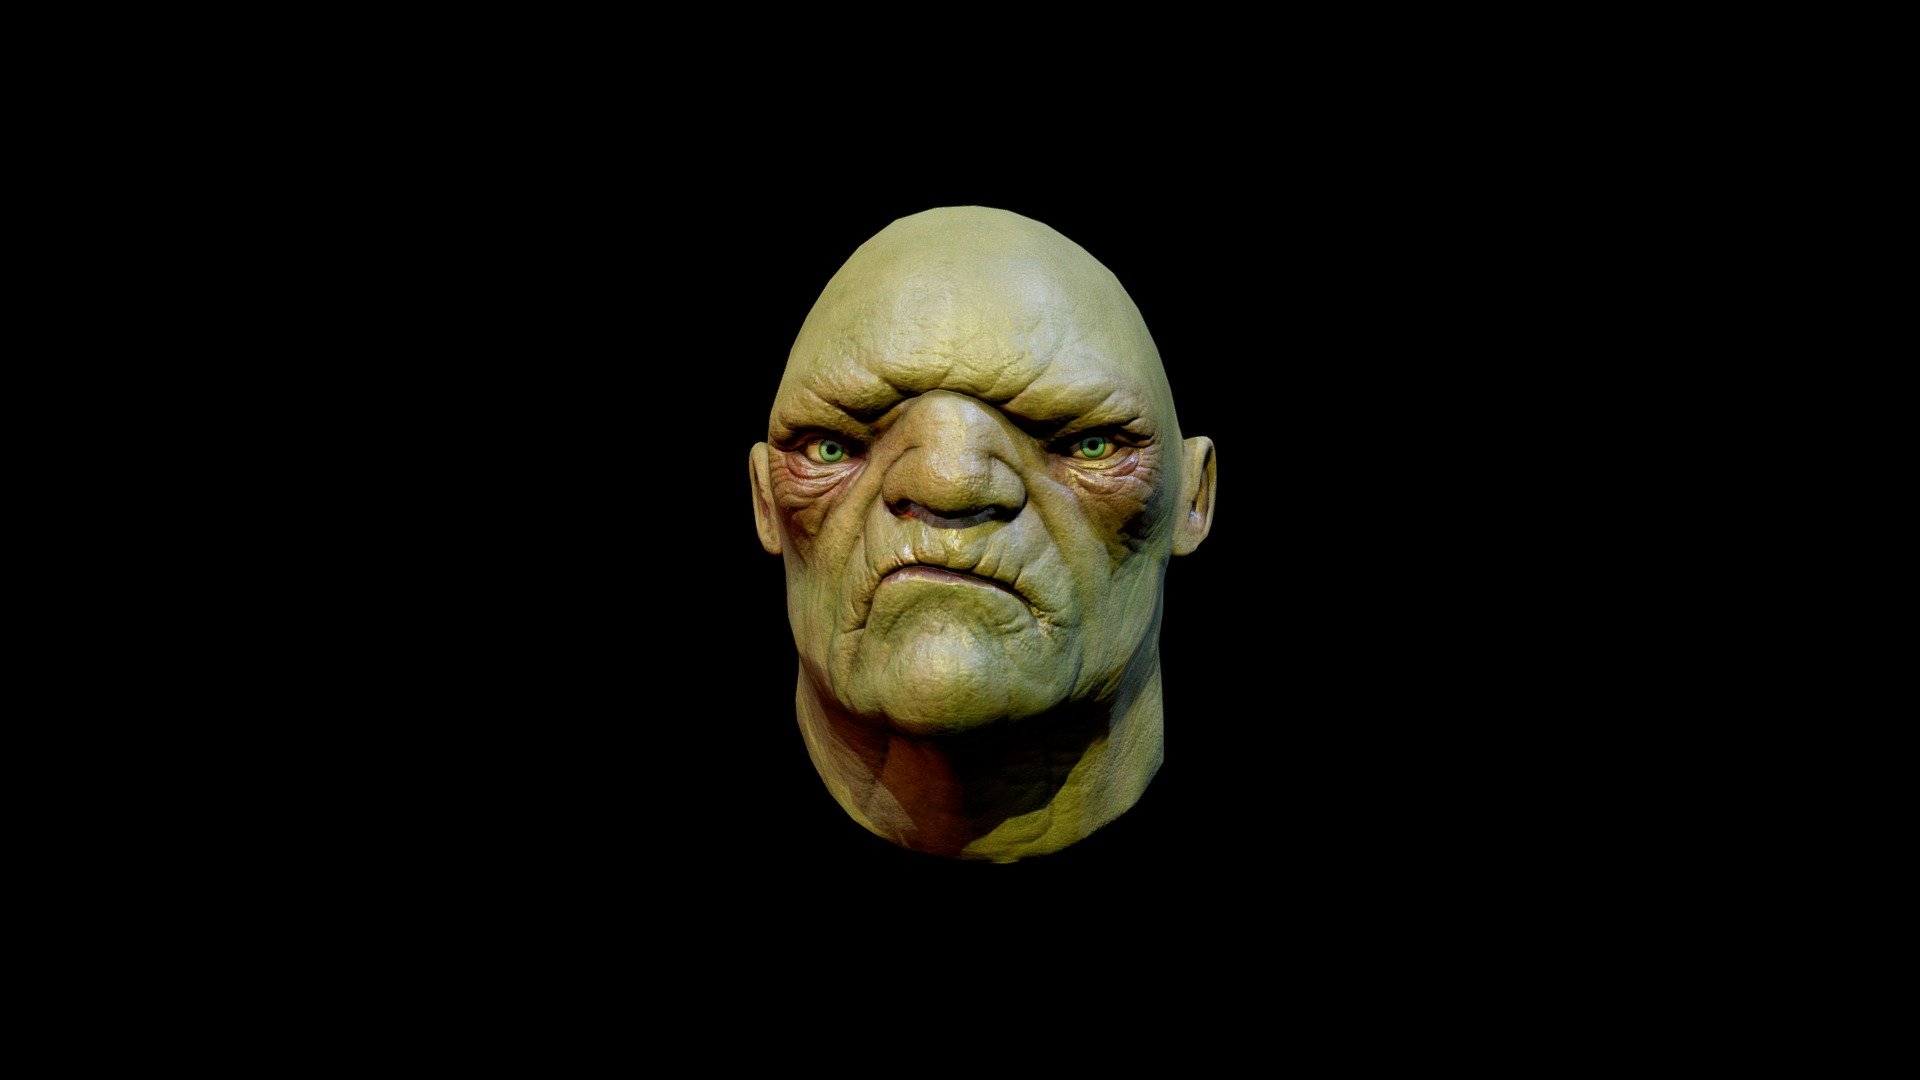 A head sculpt of an orc based on a sculpt from Sir Richard Taylor (http://www.massey.ac.nz/massey/fms/Massey%20News/2016/5/images/Richard-Taylor-Weta-Workshop.jpg )
Used Substance Painter for the first time on this one.
For more images : https://www.artstation.com/artwork/6aZyy6 - Orc Head - Buy Royalty Free 3D model by Pixel Ninja (@demonoider) 3d model